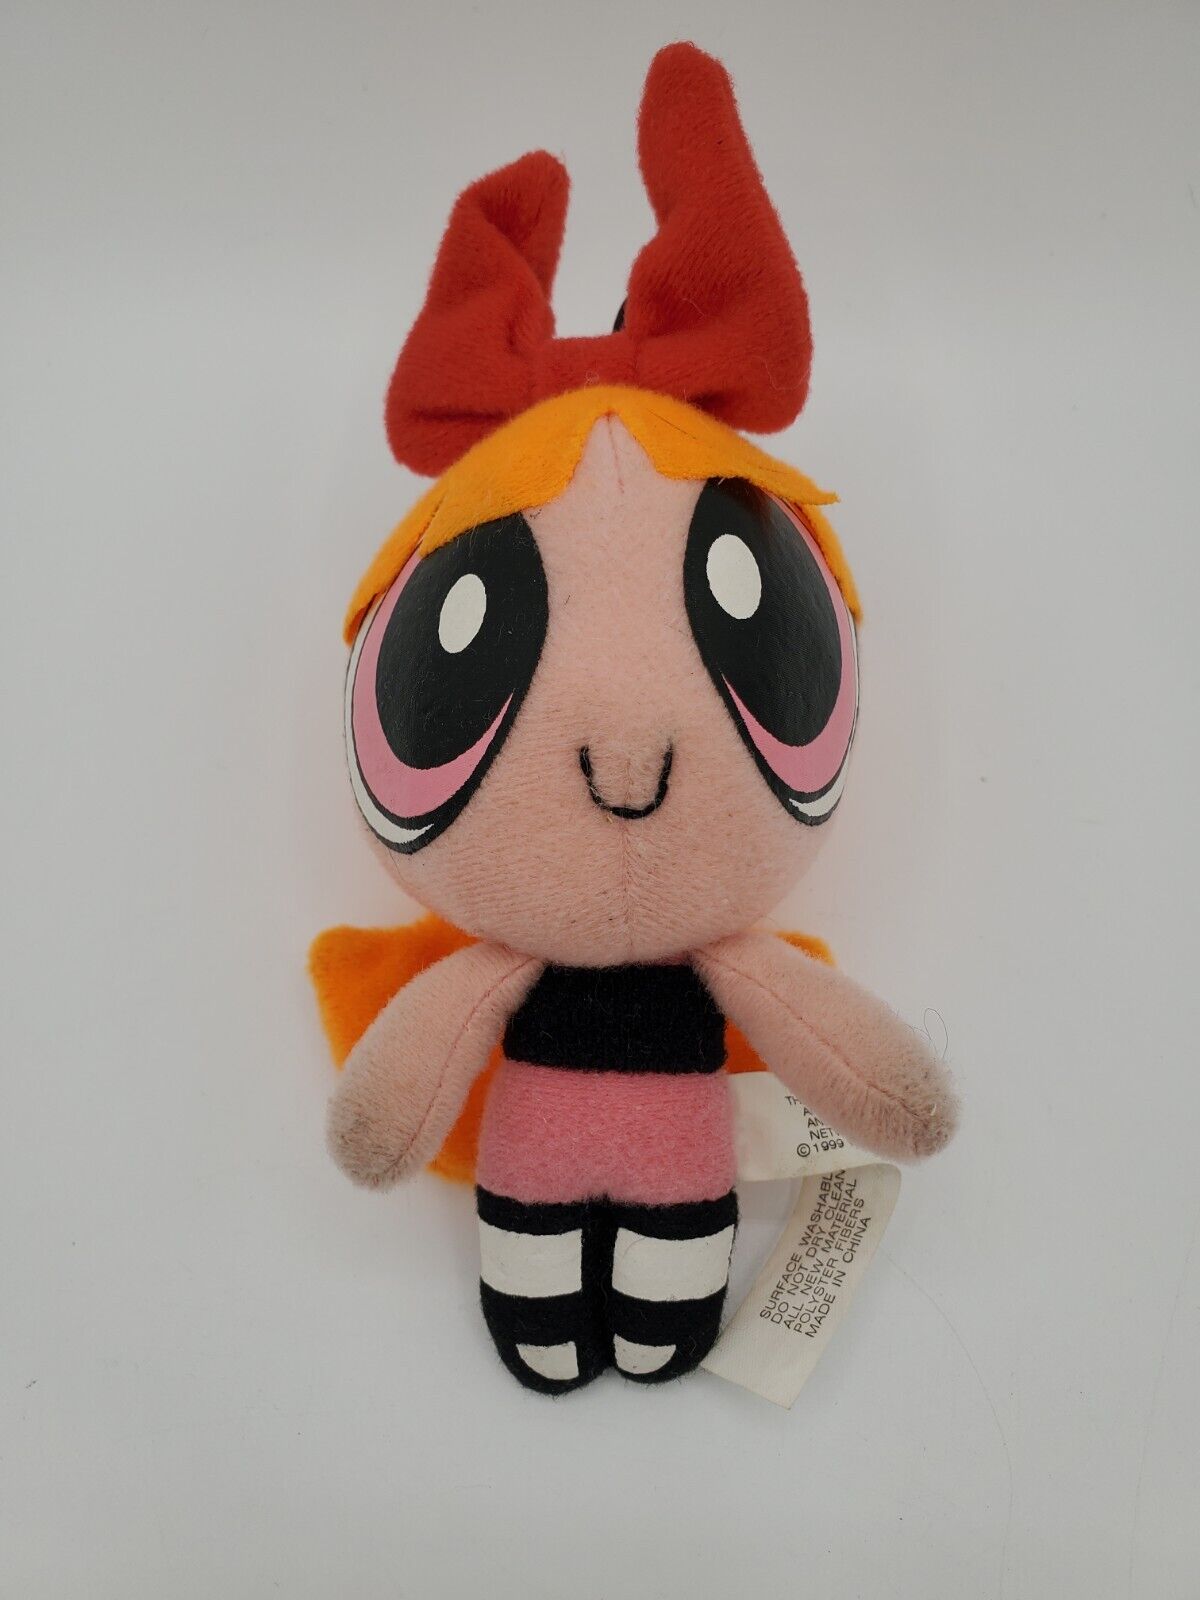 Vintage 1999 The Power Puff Girls Blossom Plush Backpack Clip 5 Inch Keychain